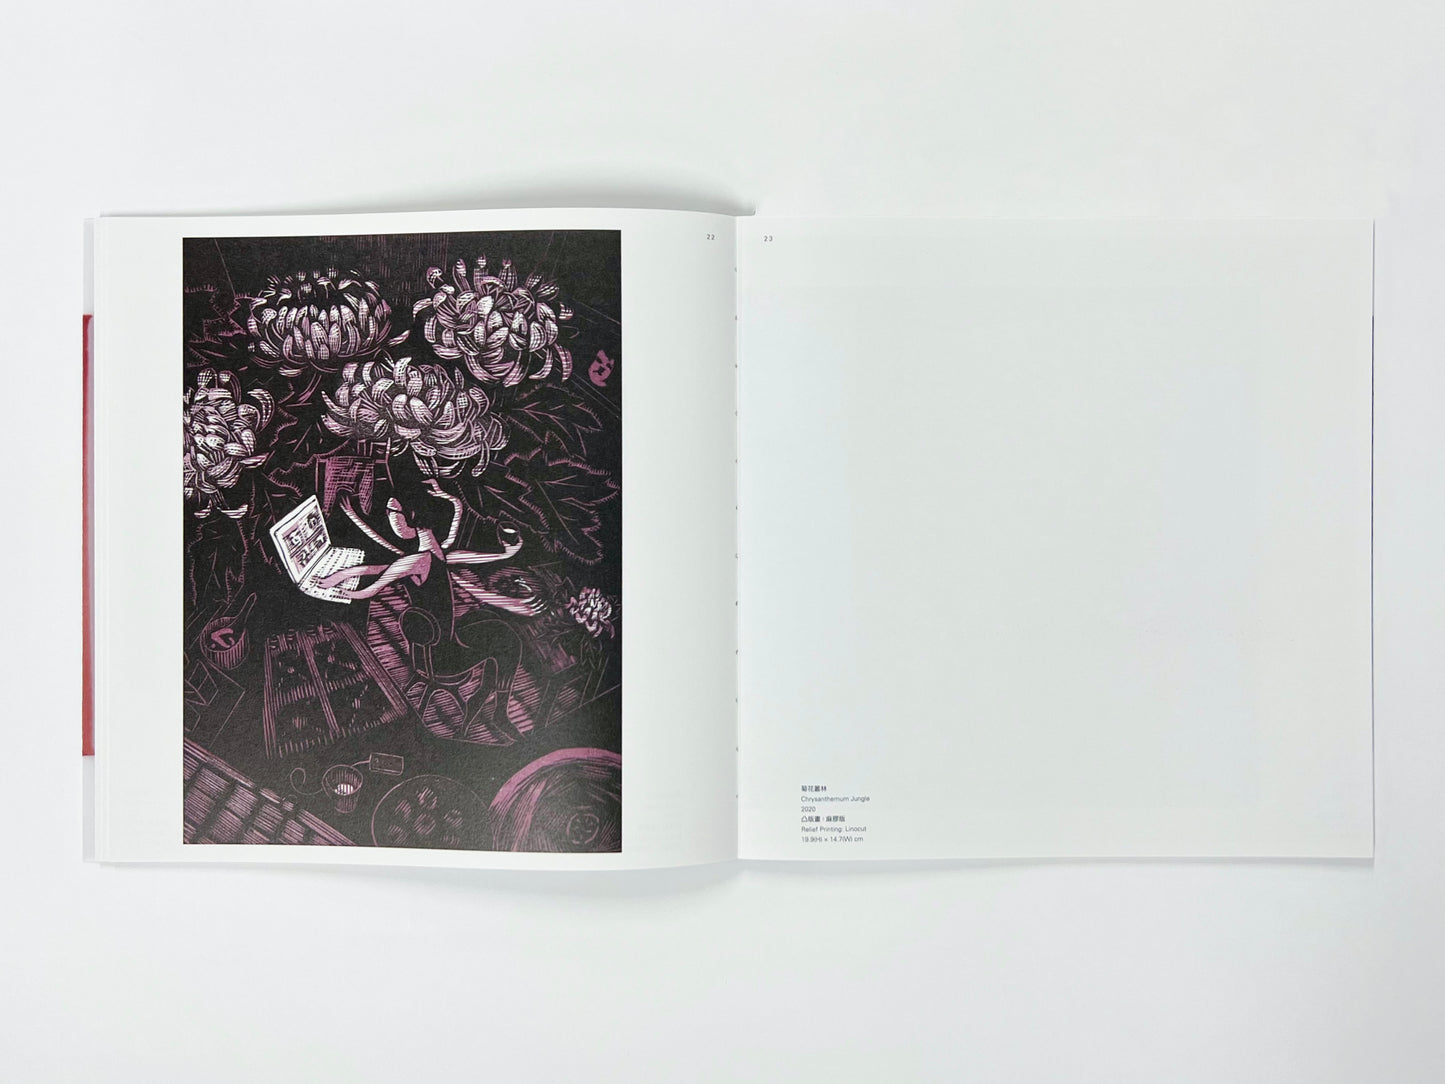 Catalogue of "Wuon-Gean HO: Before I Forget"